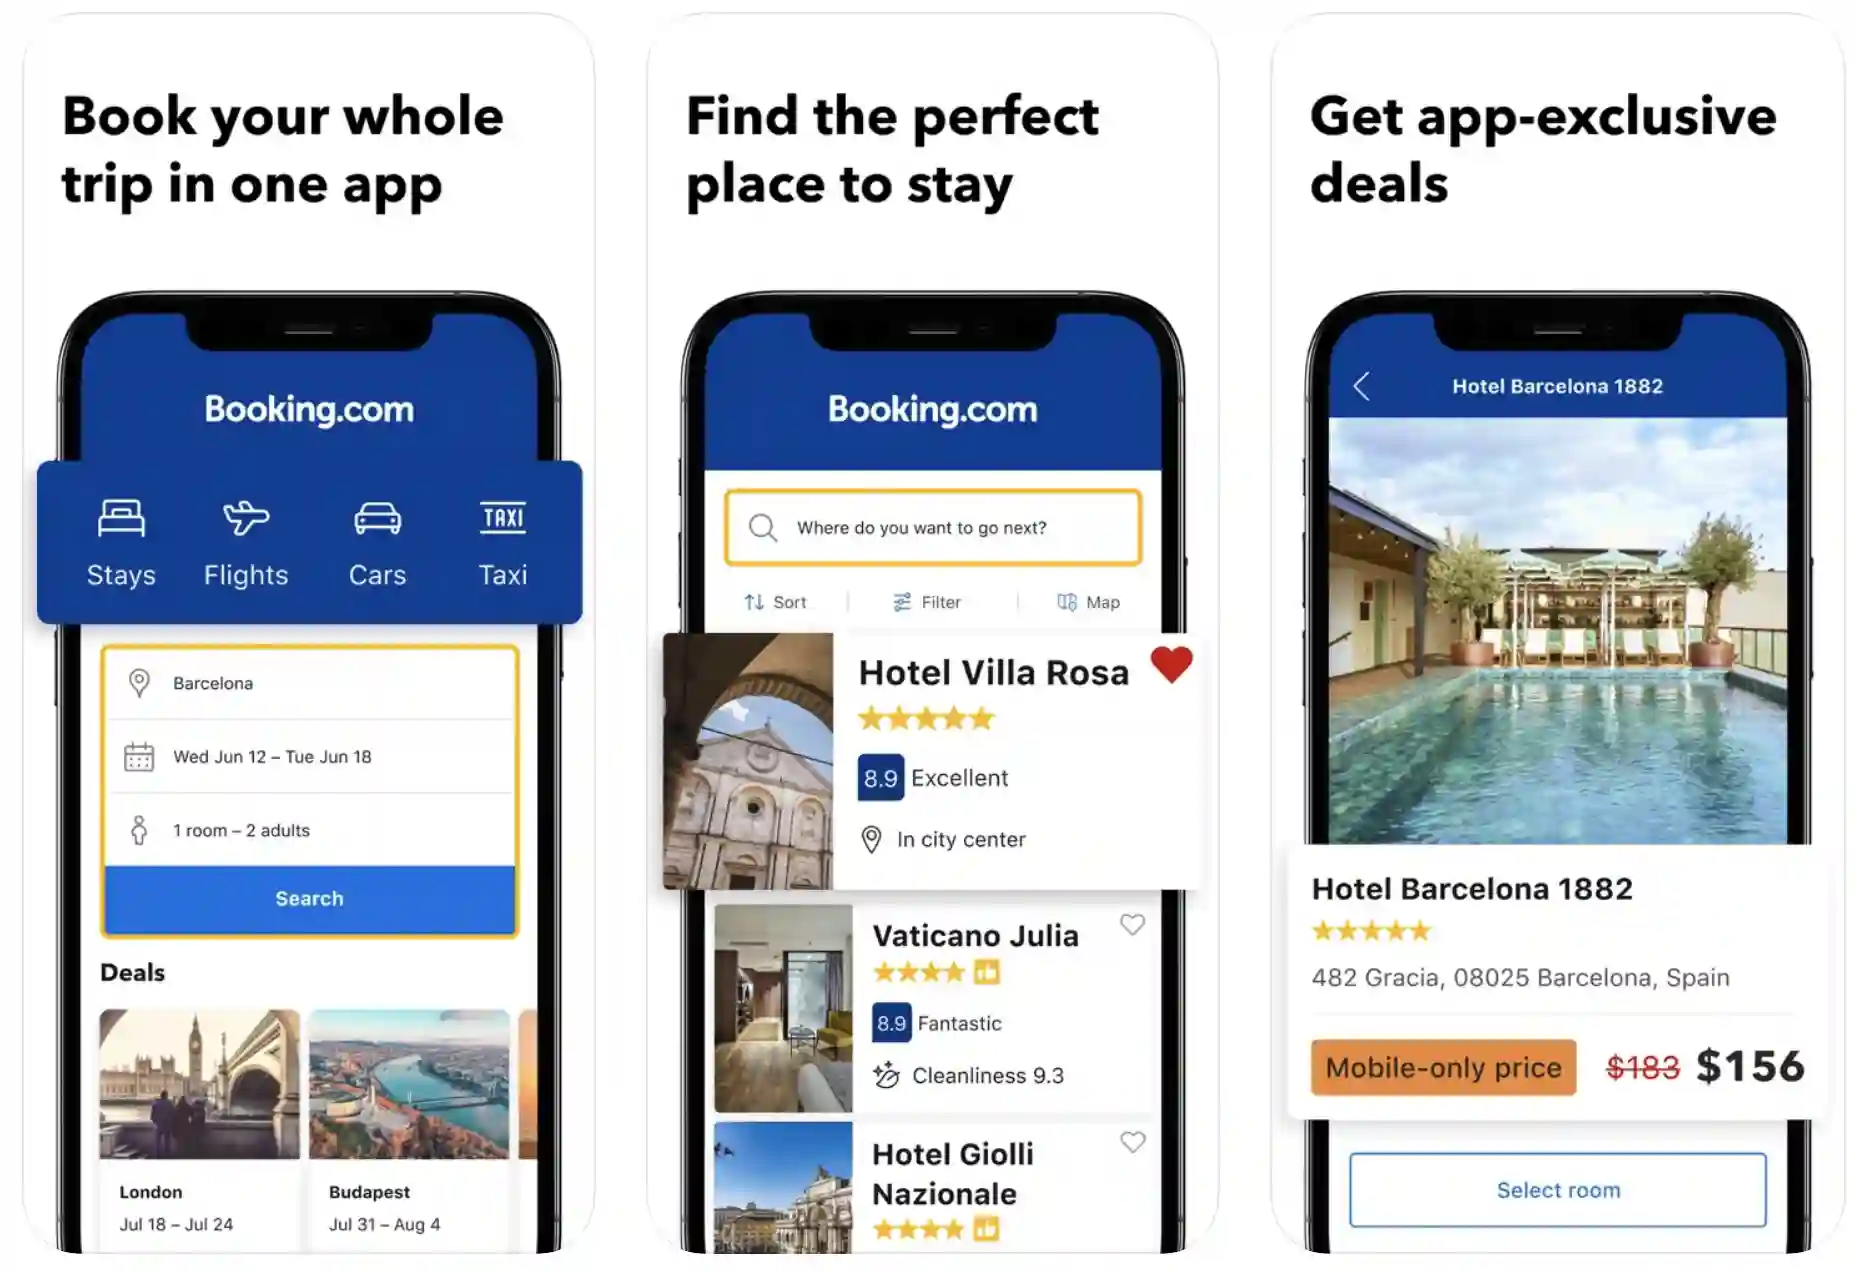 Apps like Airbnb